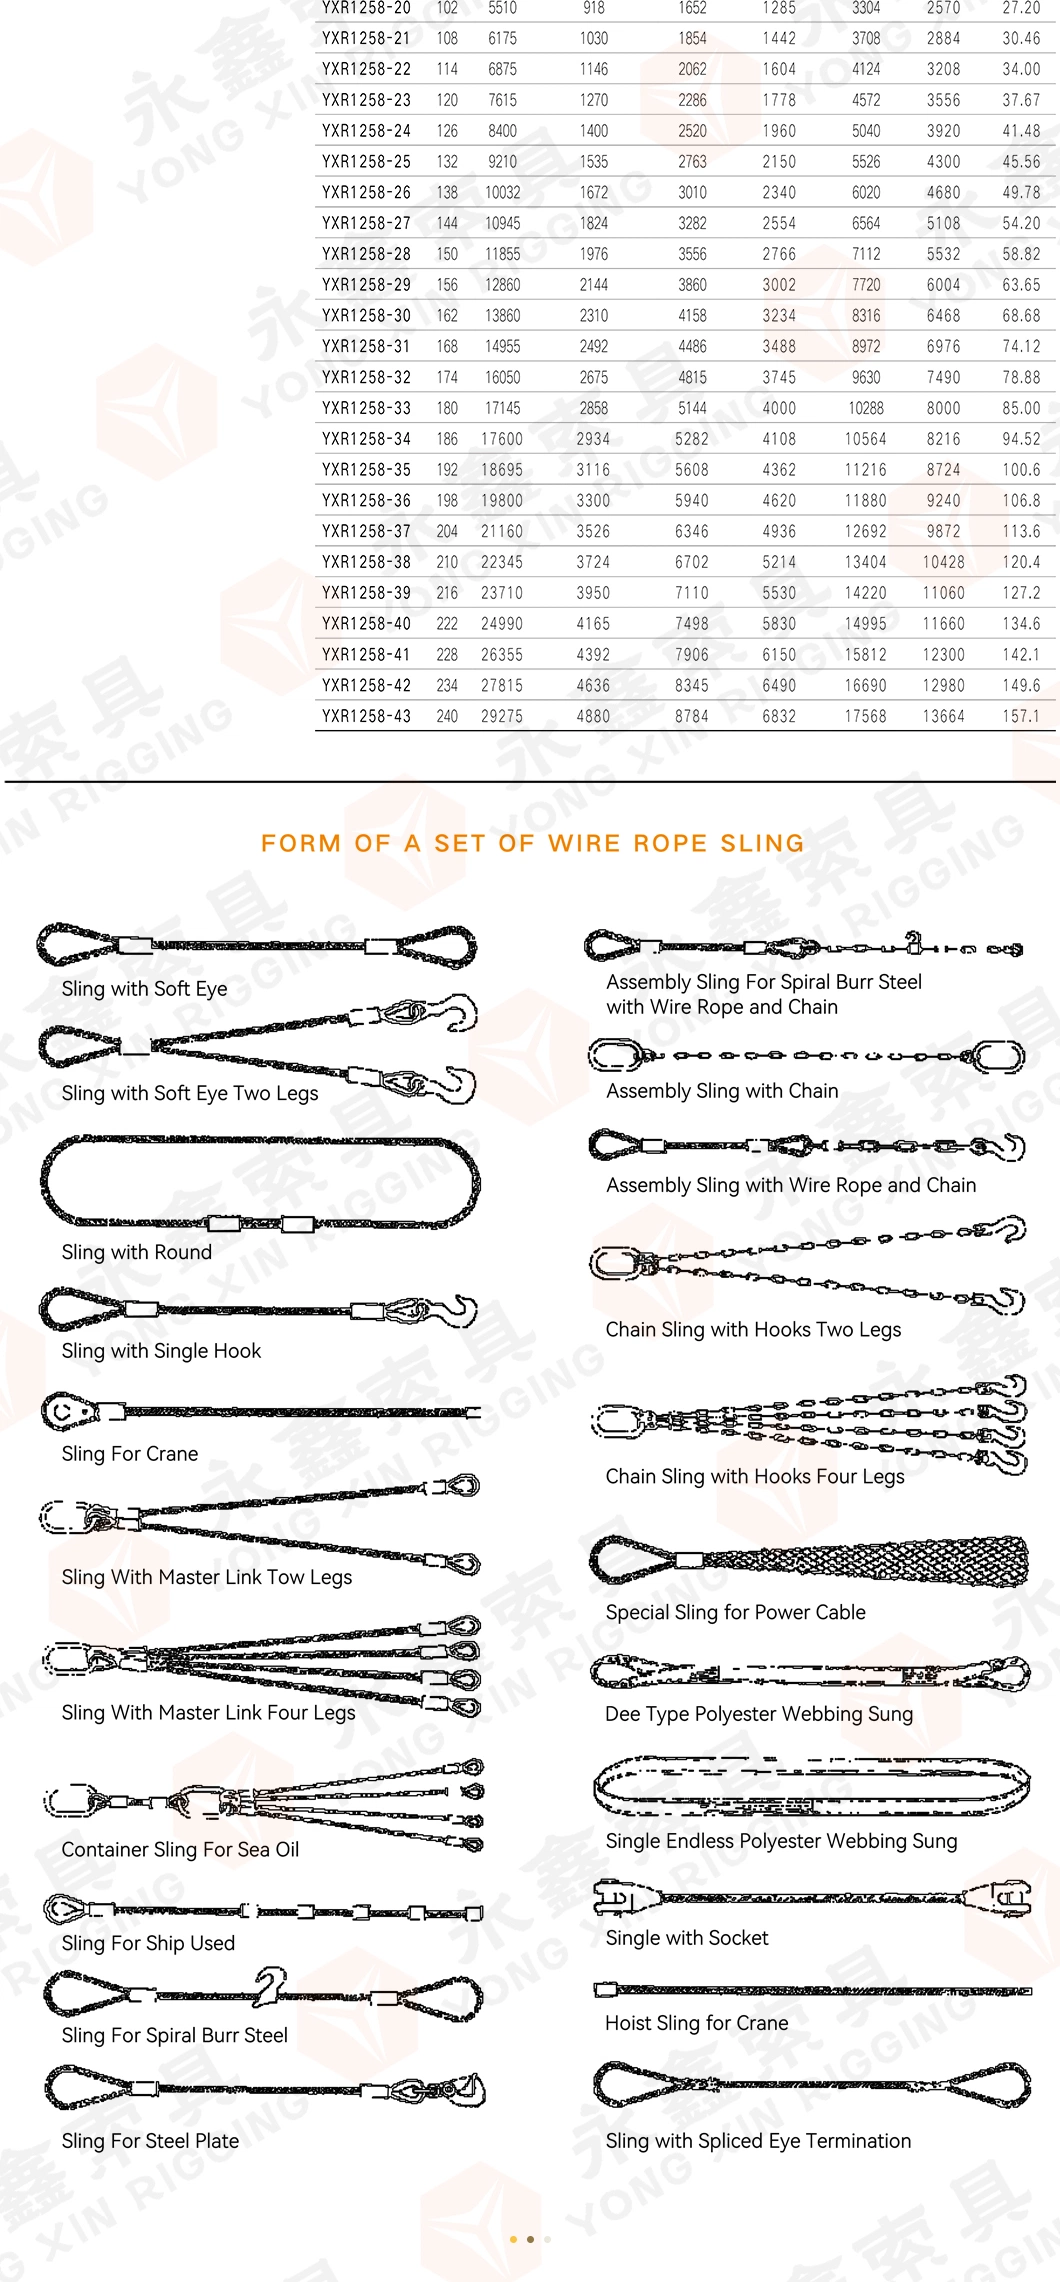 Heavy Duty 7*7 Stainless Steel Wire Rope Assembly Safety Cable with Snap Hook Wire Rope Sling with Hook End